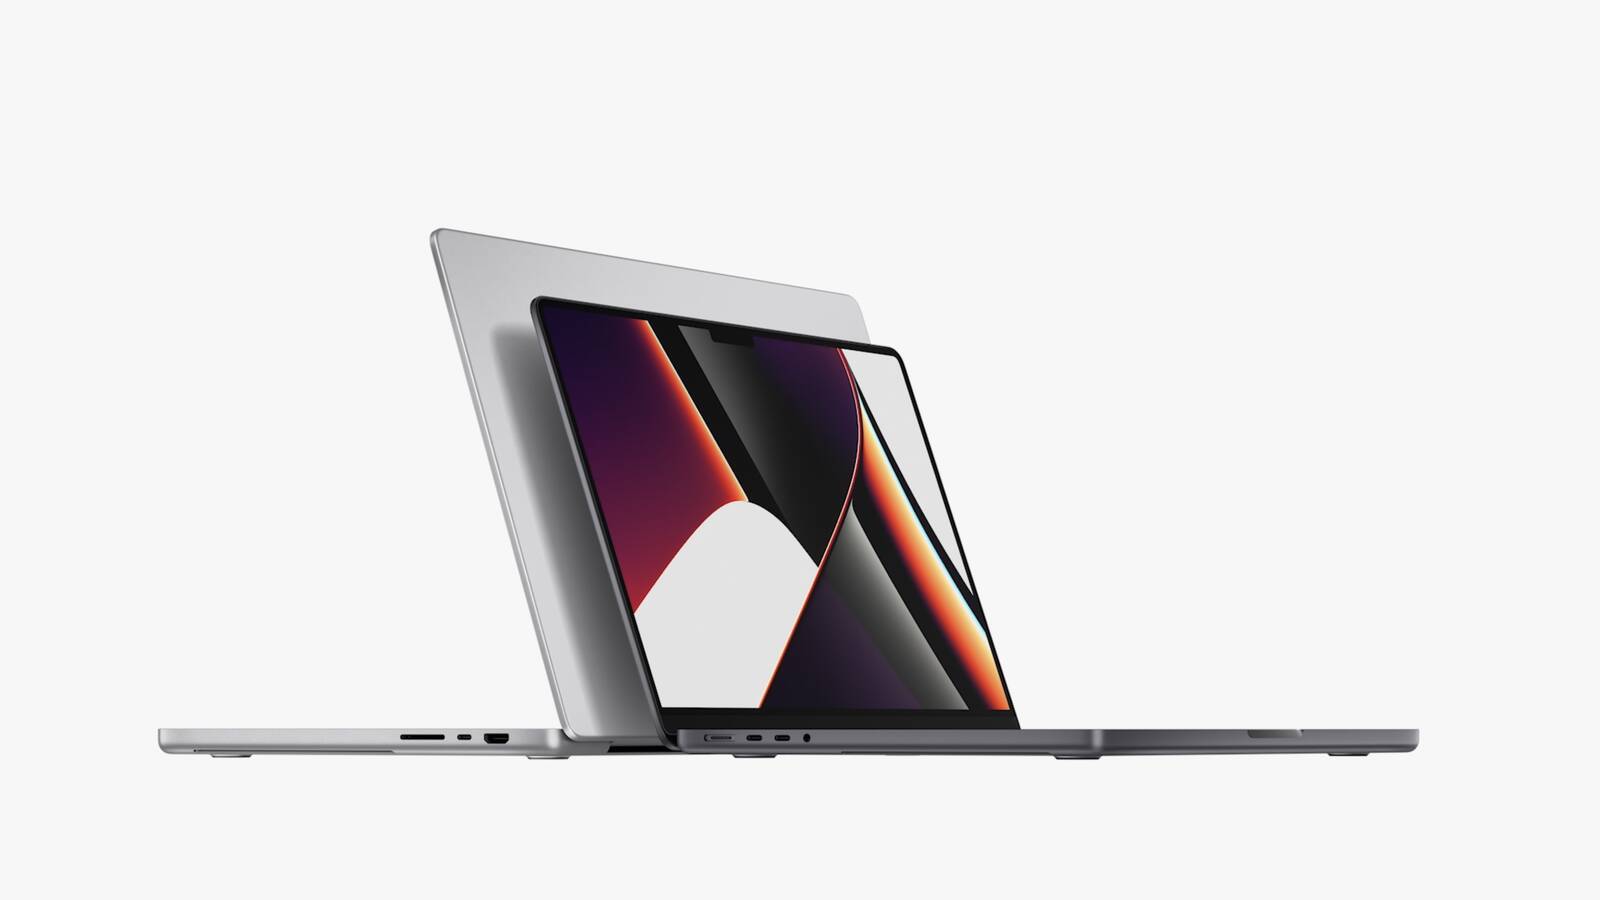 New MacBook Pros Feature 3.5mm Headphone Jack With Advanced Support for  High-Impedance Headphones, Six-Speaker Sound System - MacRumors